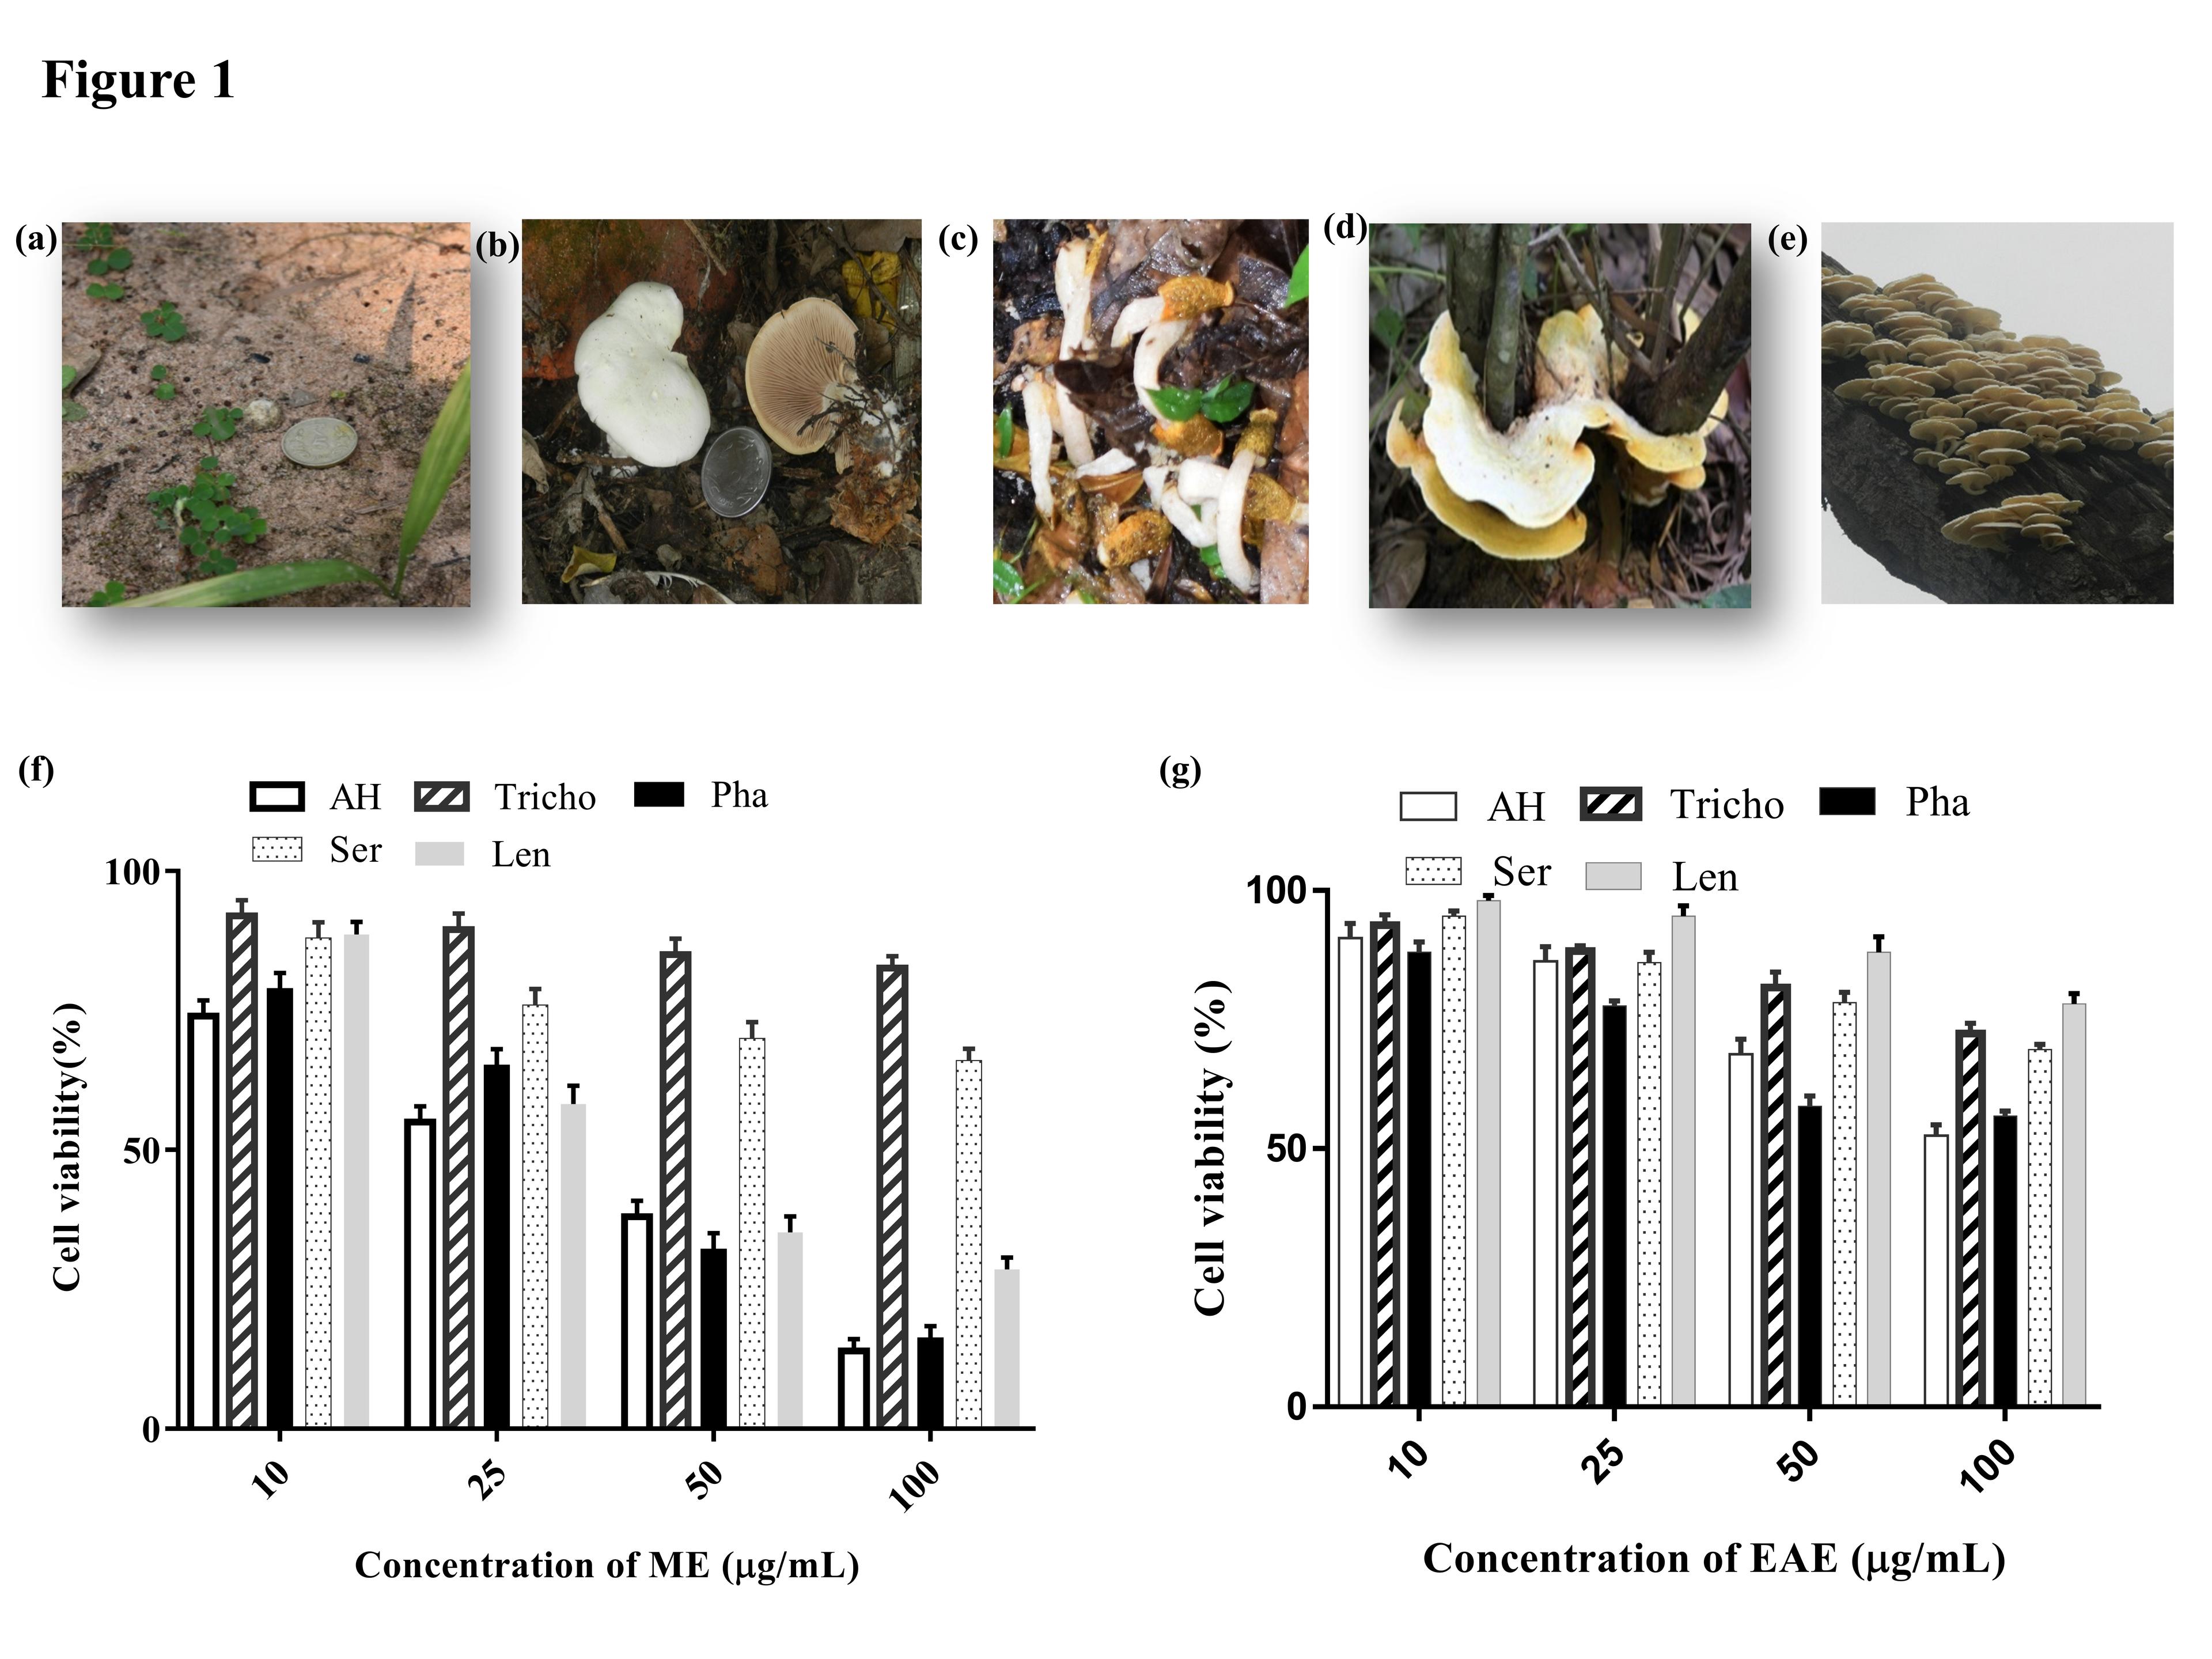 Assessment of the anti-leukemic and antioxidant potential of the methanol extract of a wild, edible, and novel mushroom, Astraeus hygrometricus, and unraveling its metabolomic profile